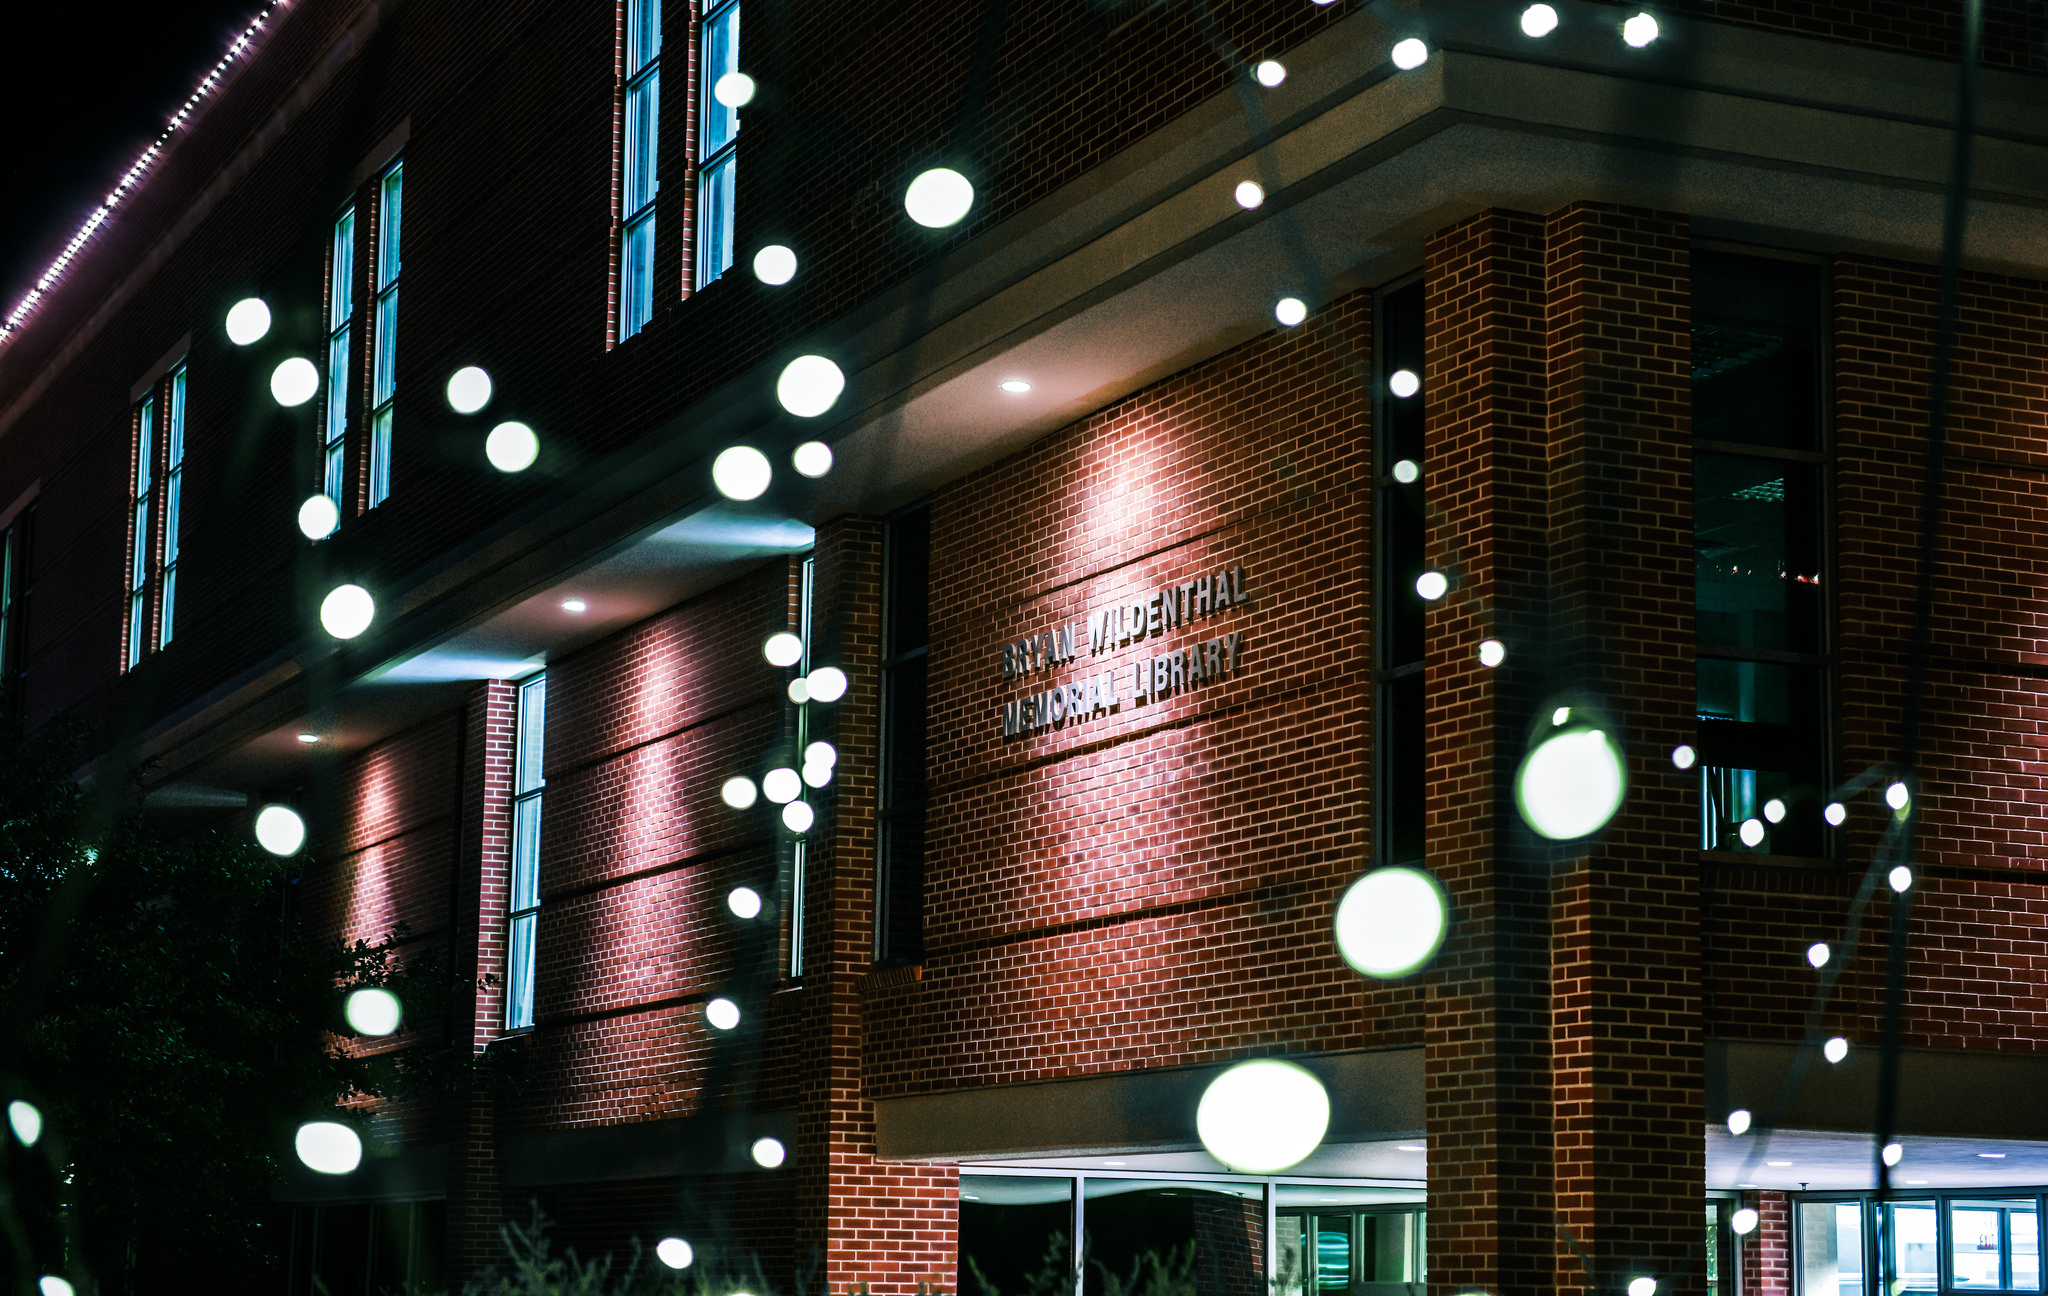 SRSU Library at night with Christmas lights.